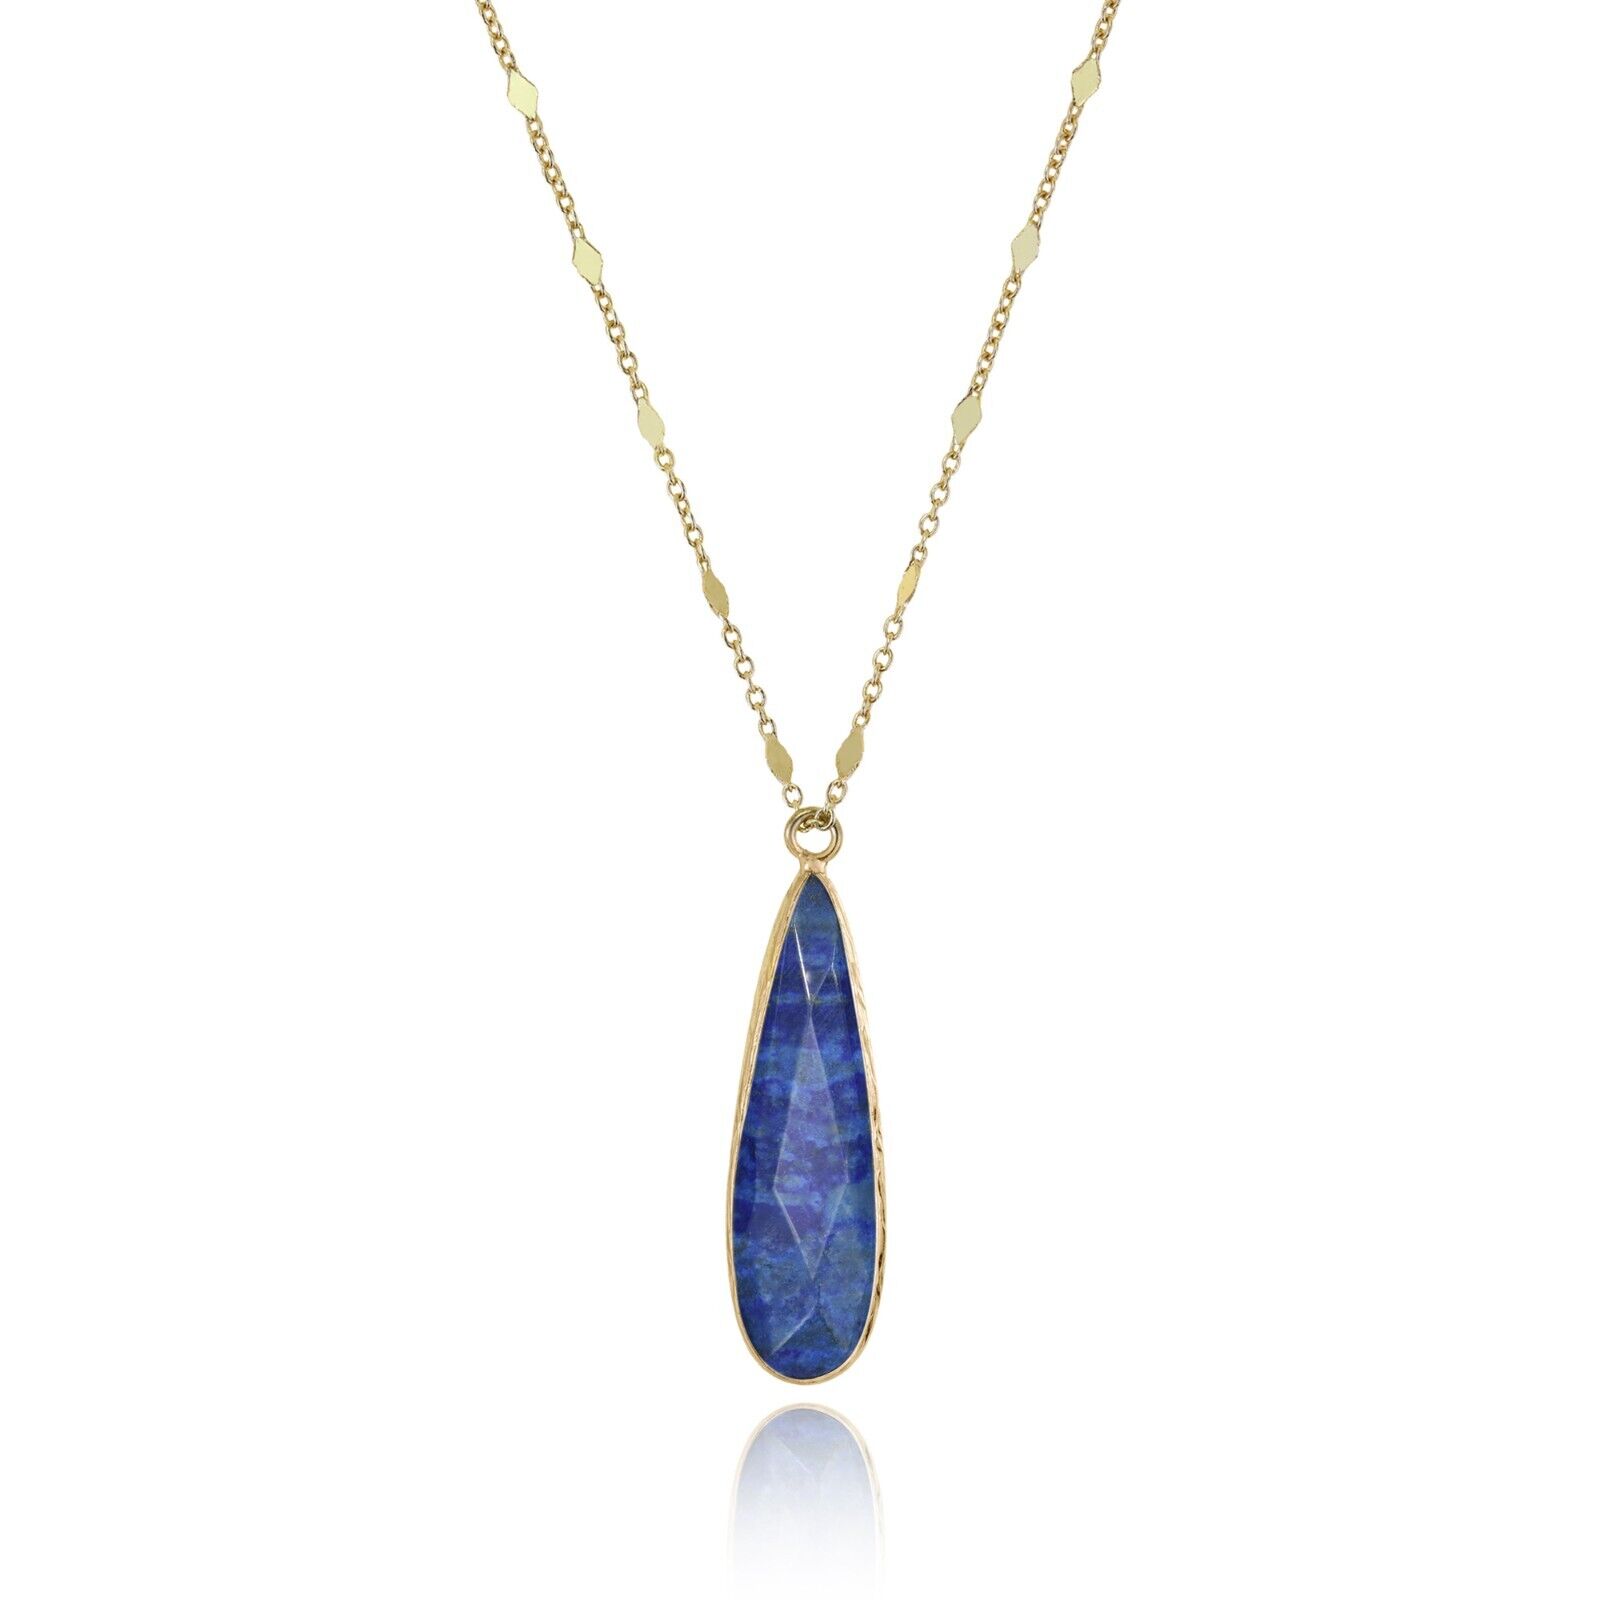 Bohemian Blue Lapis Boho Teardrop Gold over Sterling Silver Chain Necklace